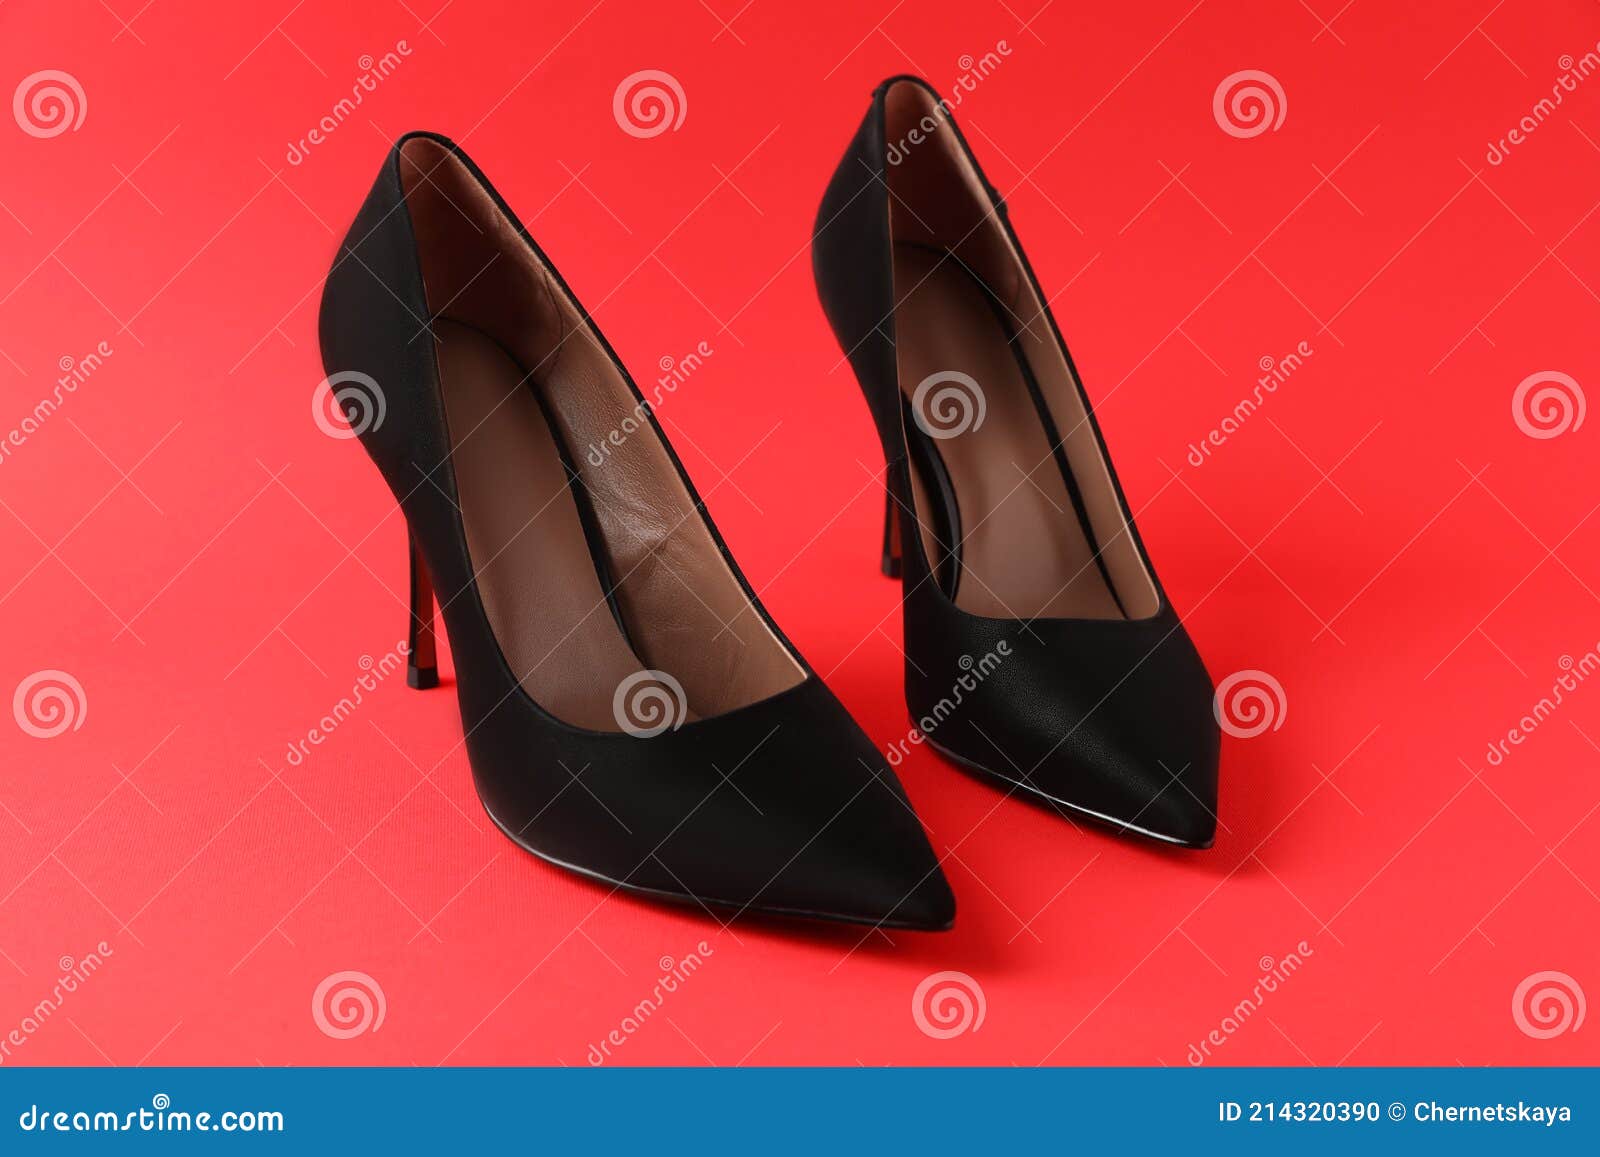 Pair of Elegant Black High Heel Shoes on Red Background Stock Photo ...